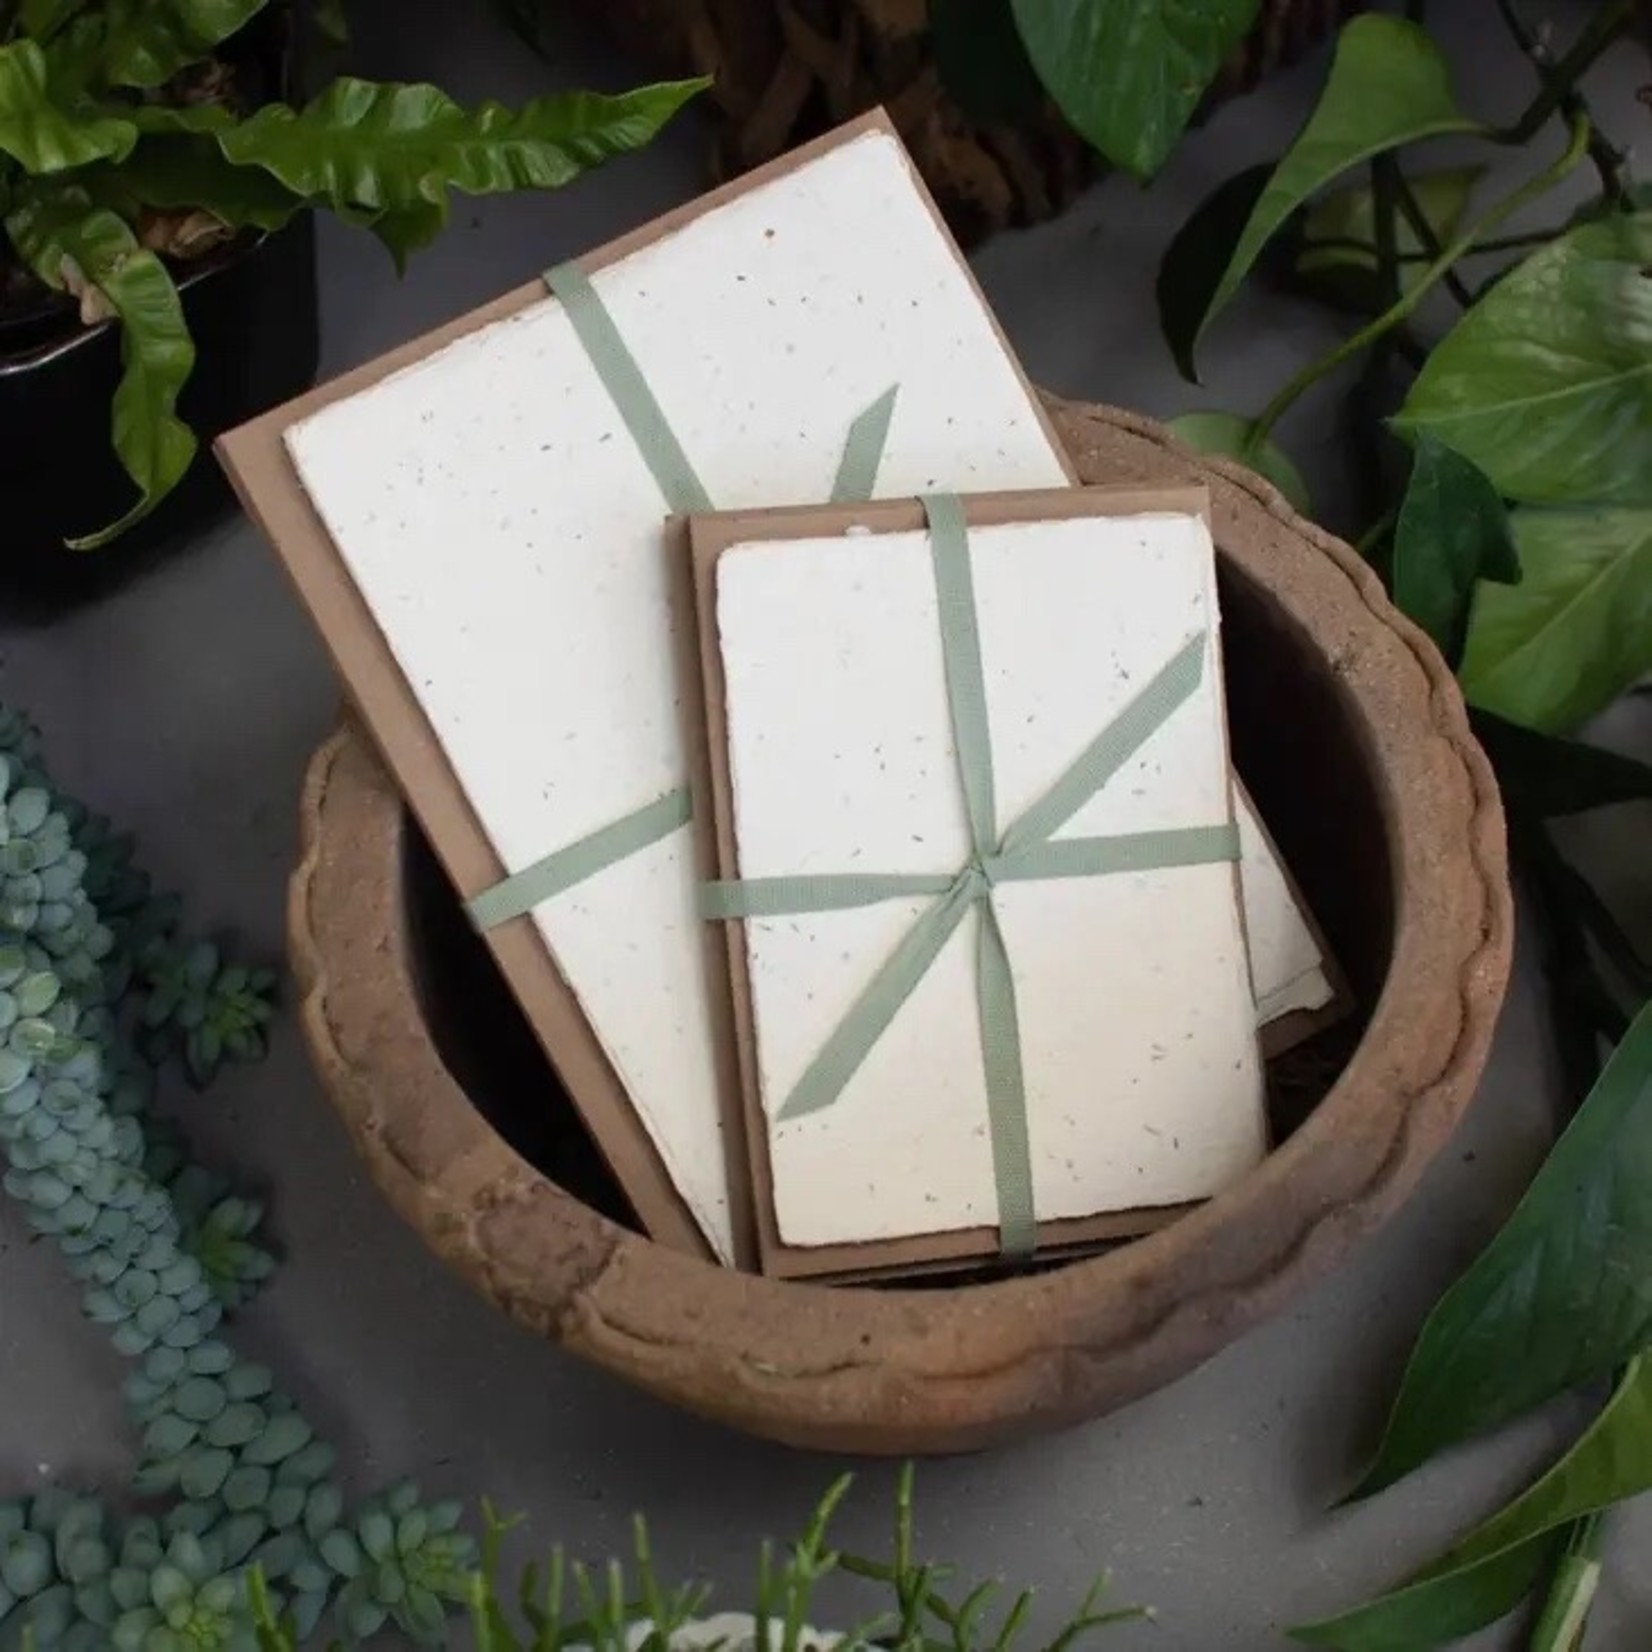 Oblation Papers seed handmade paper pack A7 amp-p-a7 - My Muses Card Shop